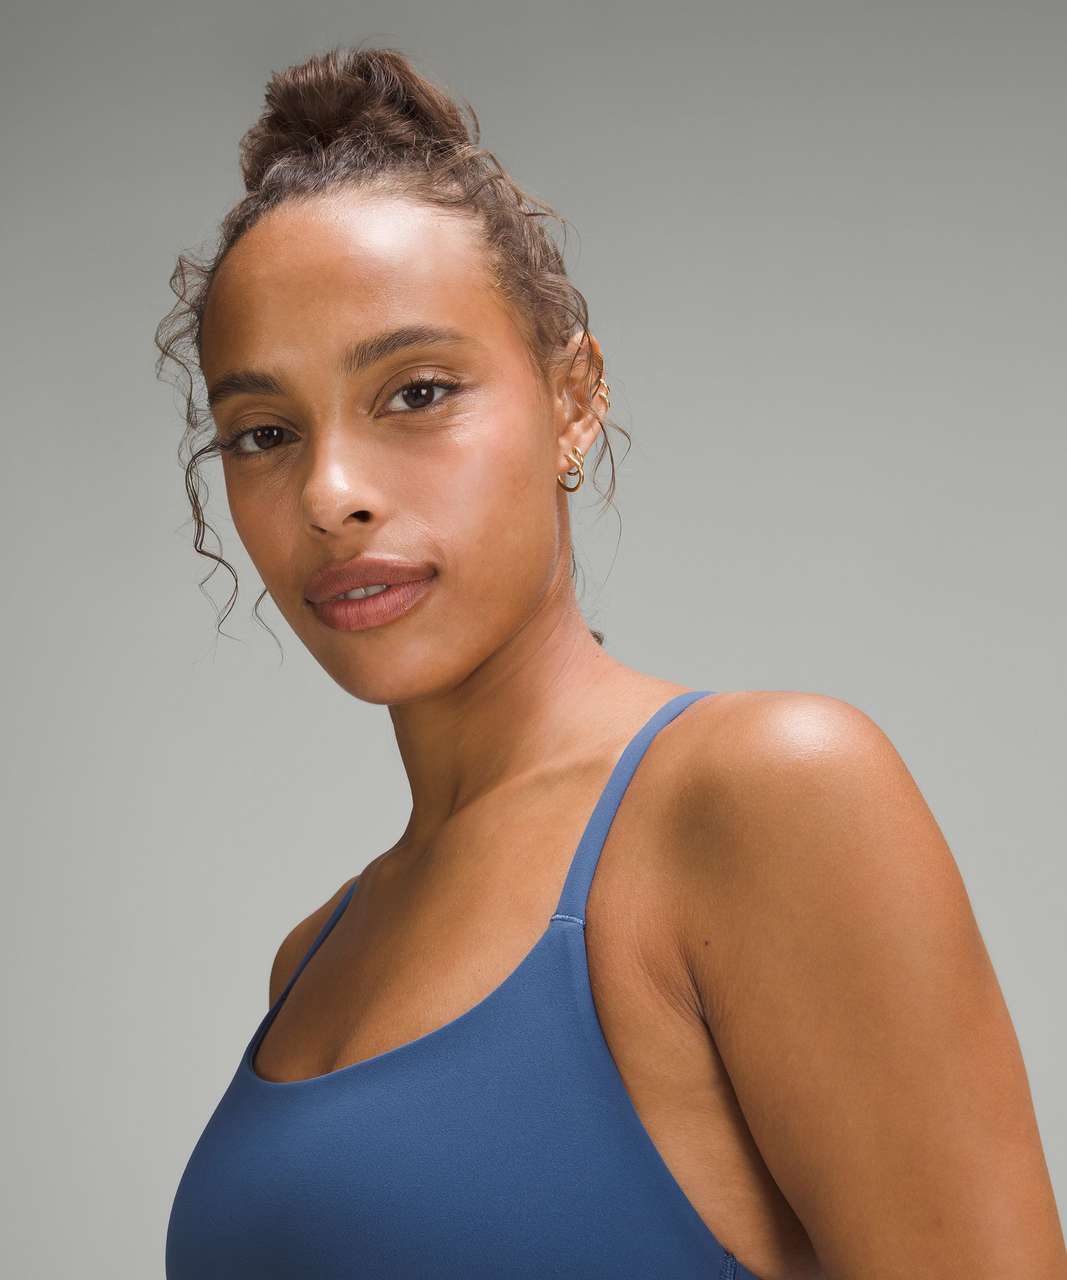 Lululemon Wunder Train Strappy Racer Bra *Light Support, A/B Cup - Pitch Blue